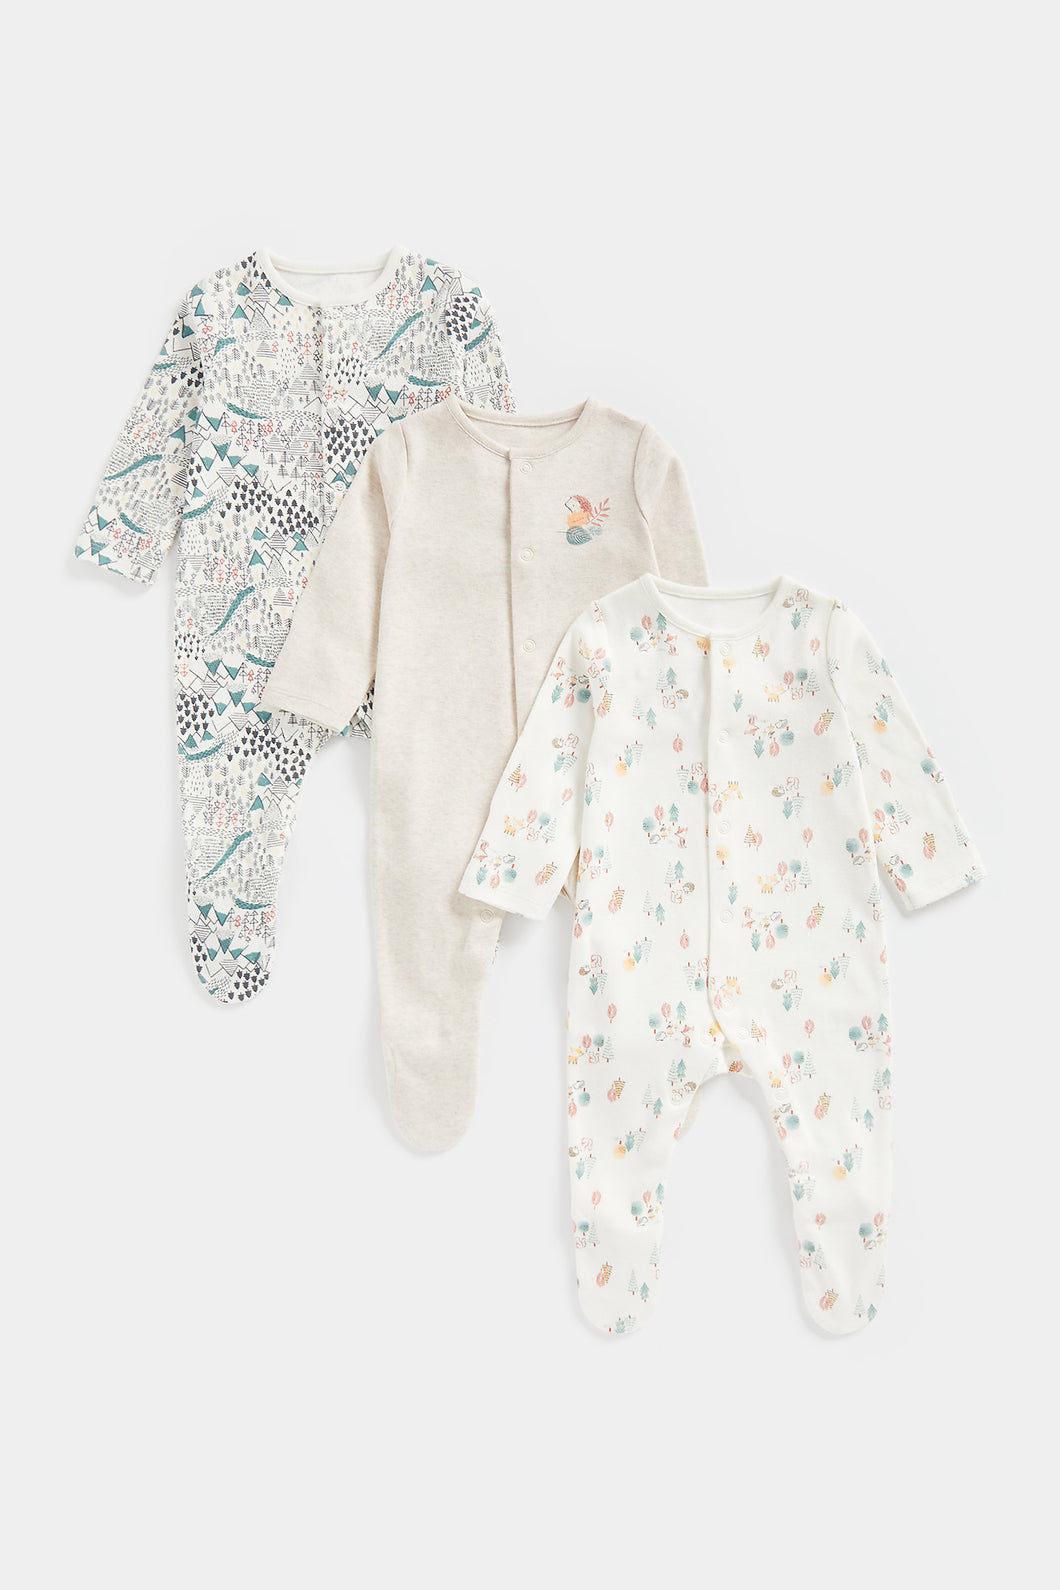 Mothercare Woodland Friends Sleepsuits - 3 Pack